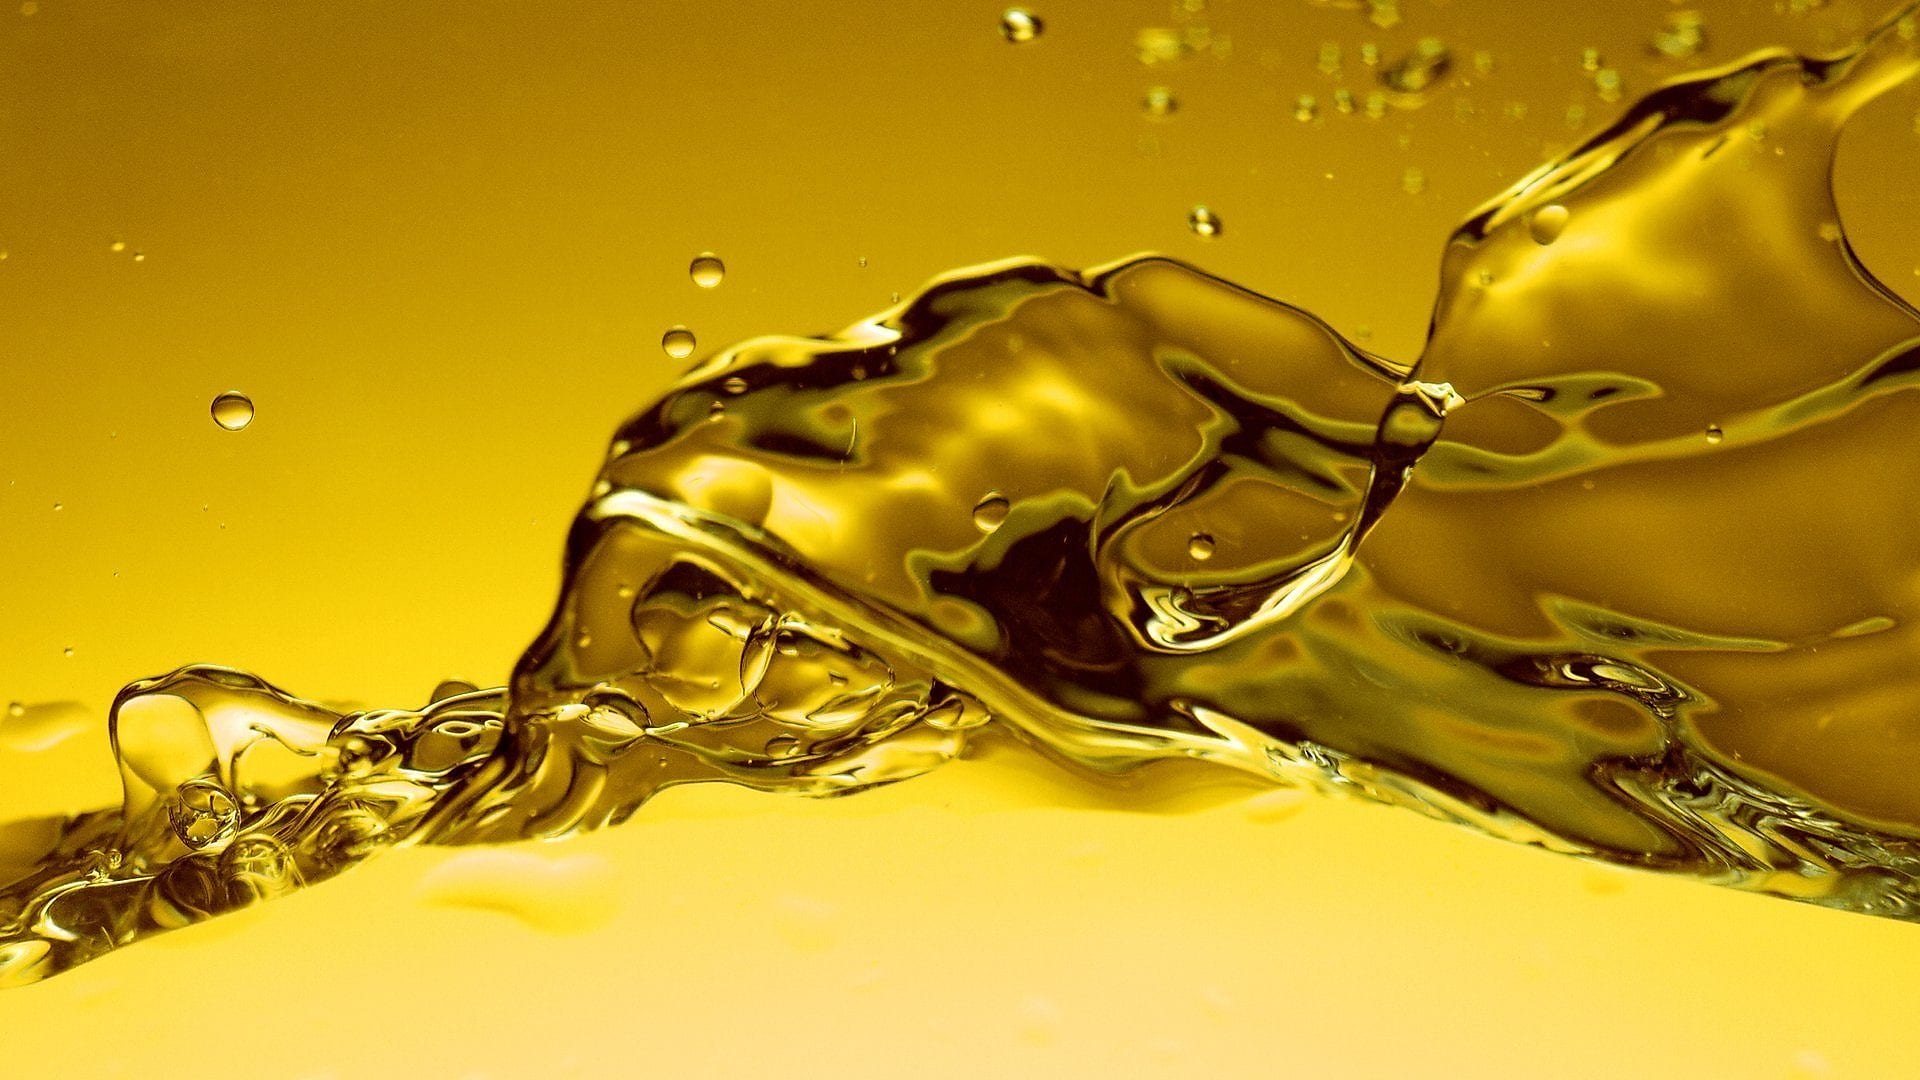 Growing Automobile Industry Worldwide to Augment the Growth in Automotive Lubricant Market